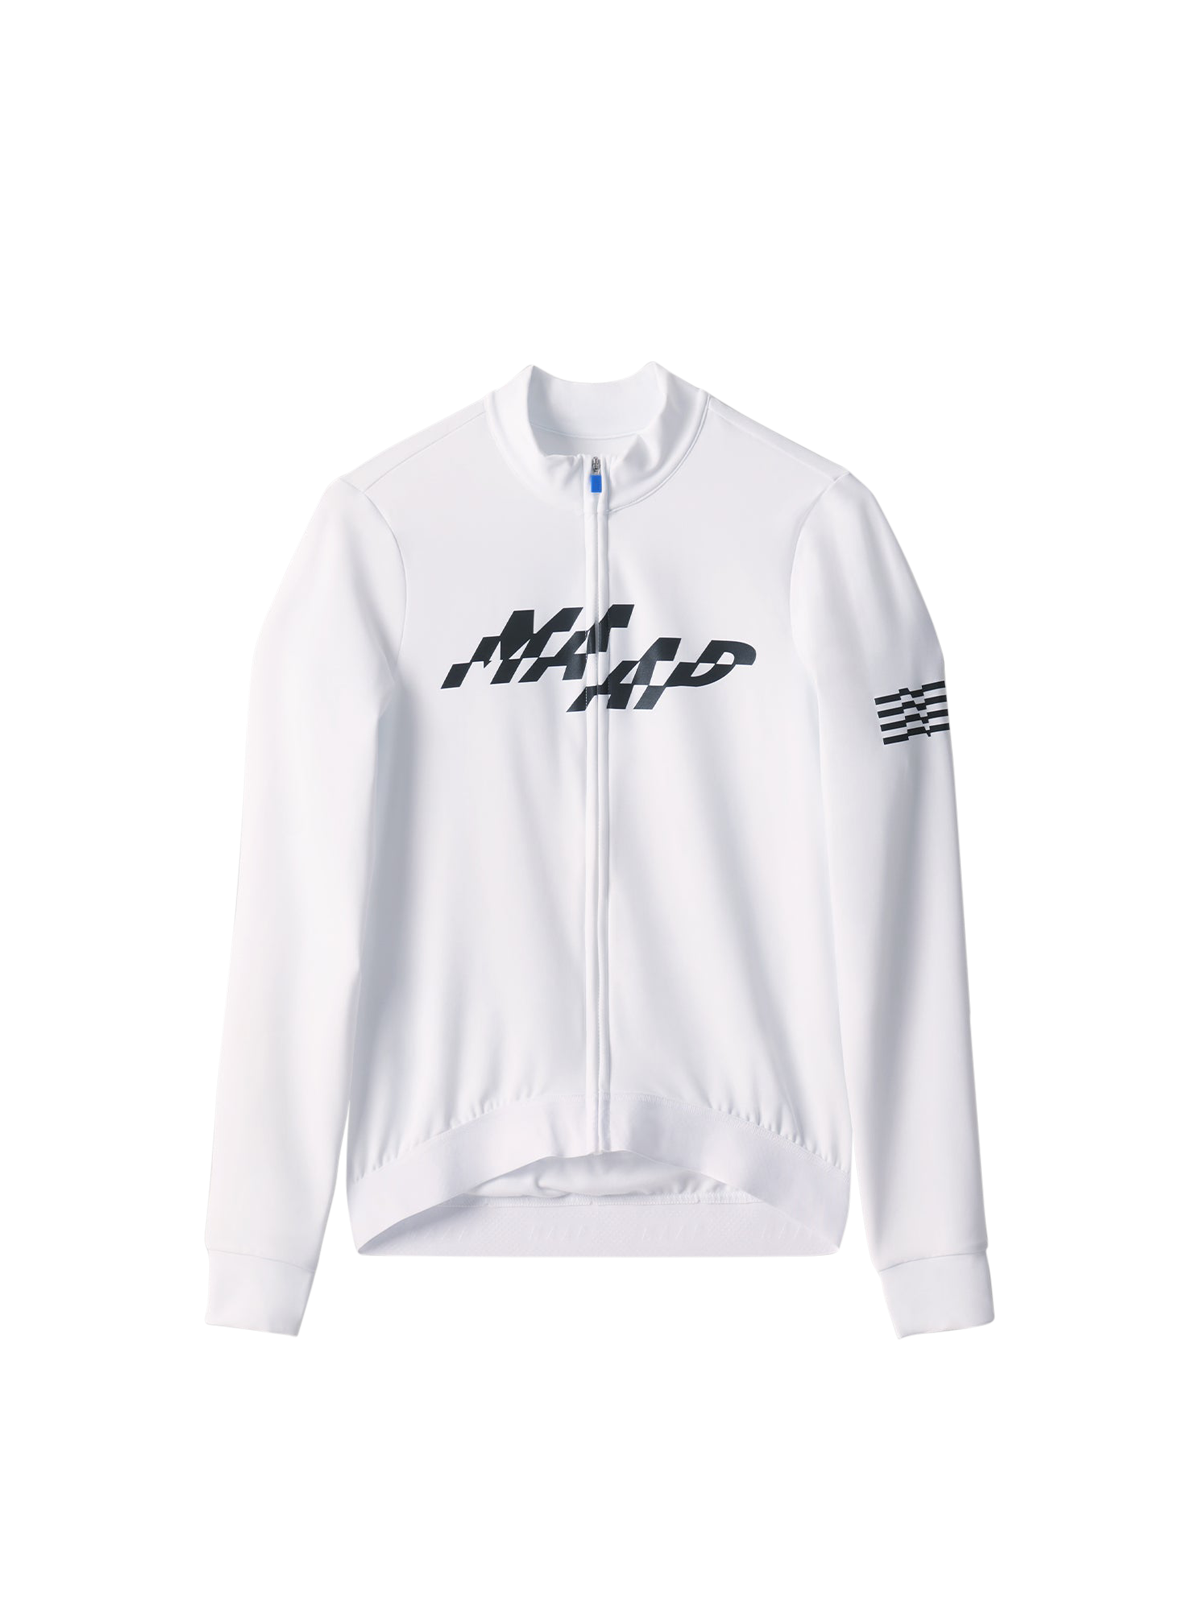 Women's Fragment Thermal LS Jersey 2.0